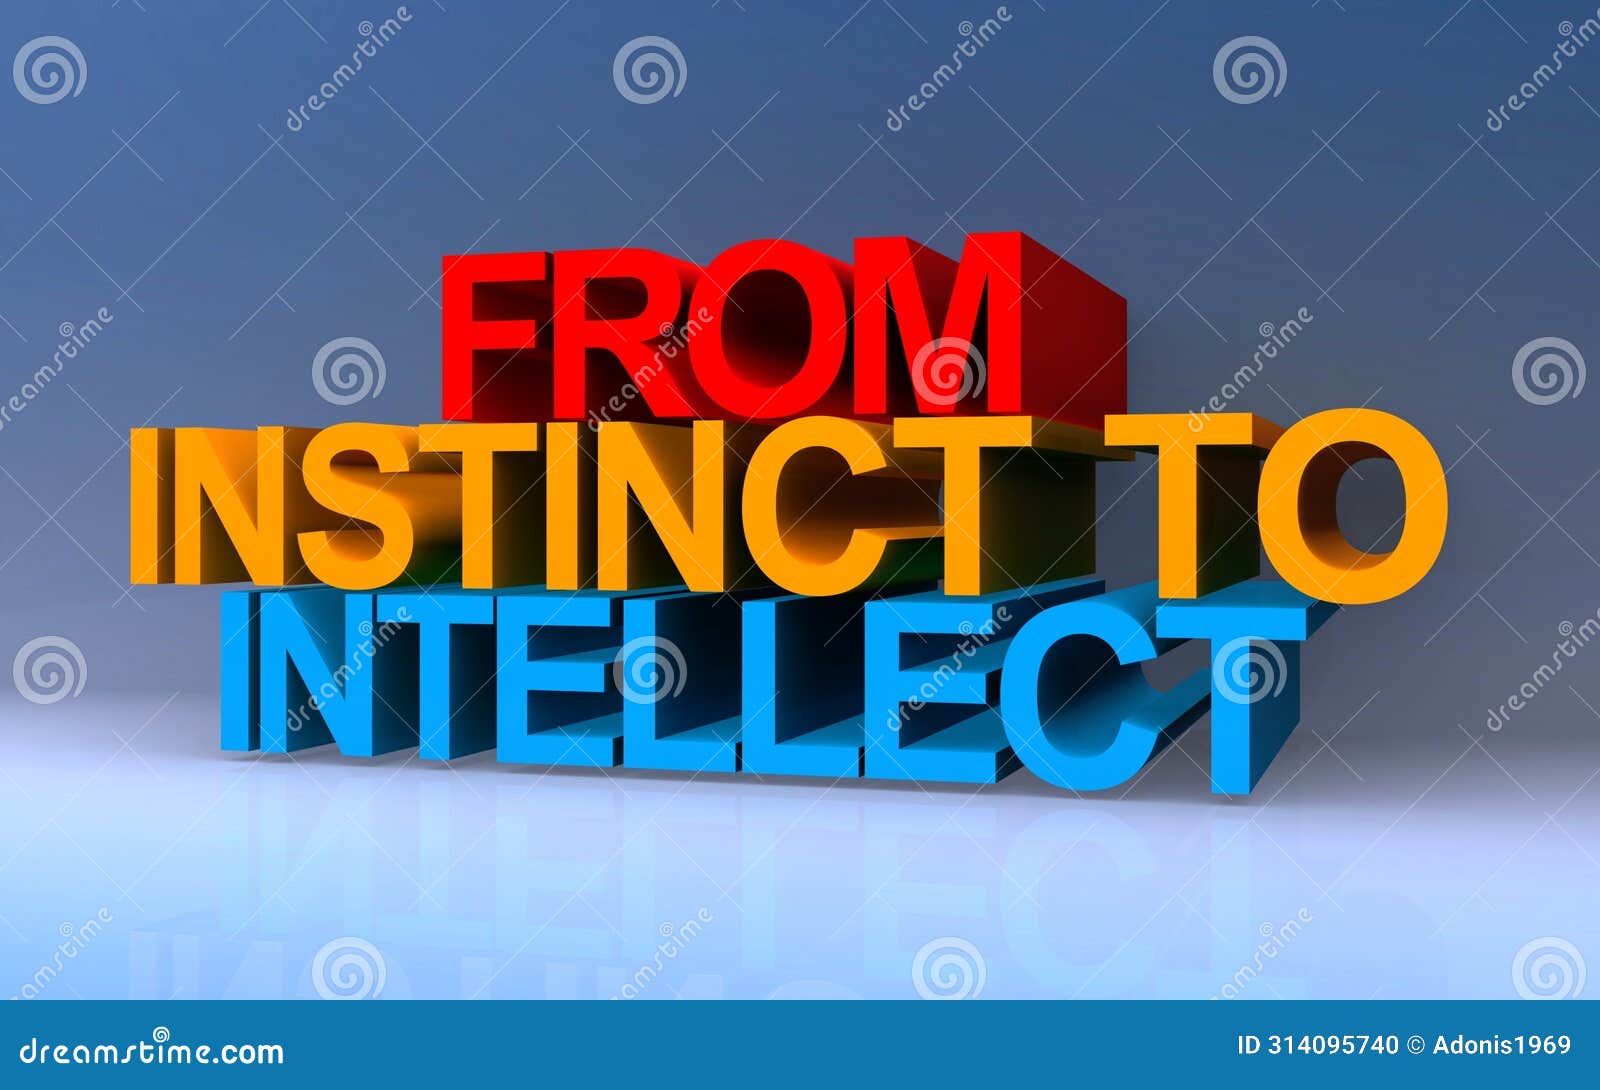 from instinct to intellect on blue